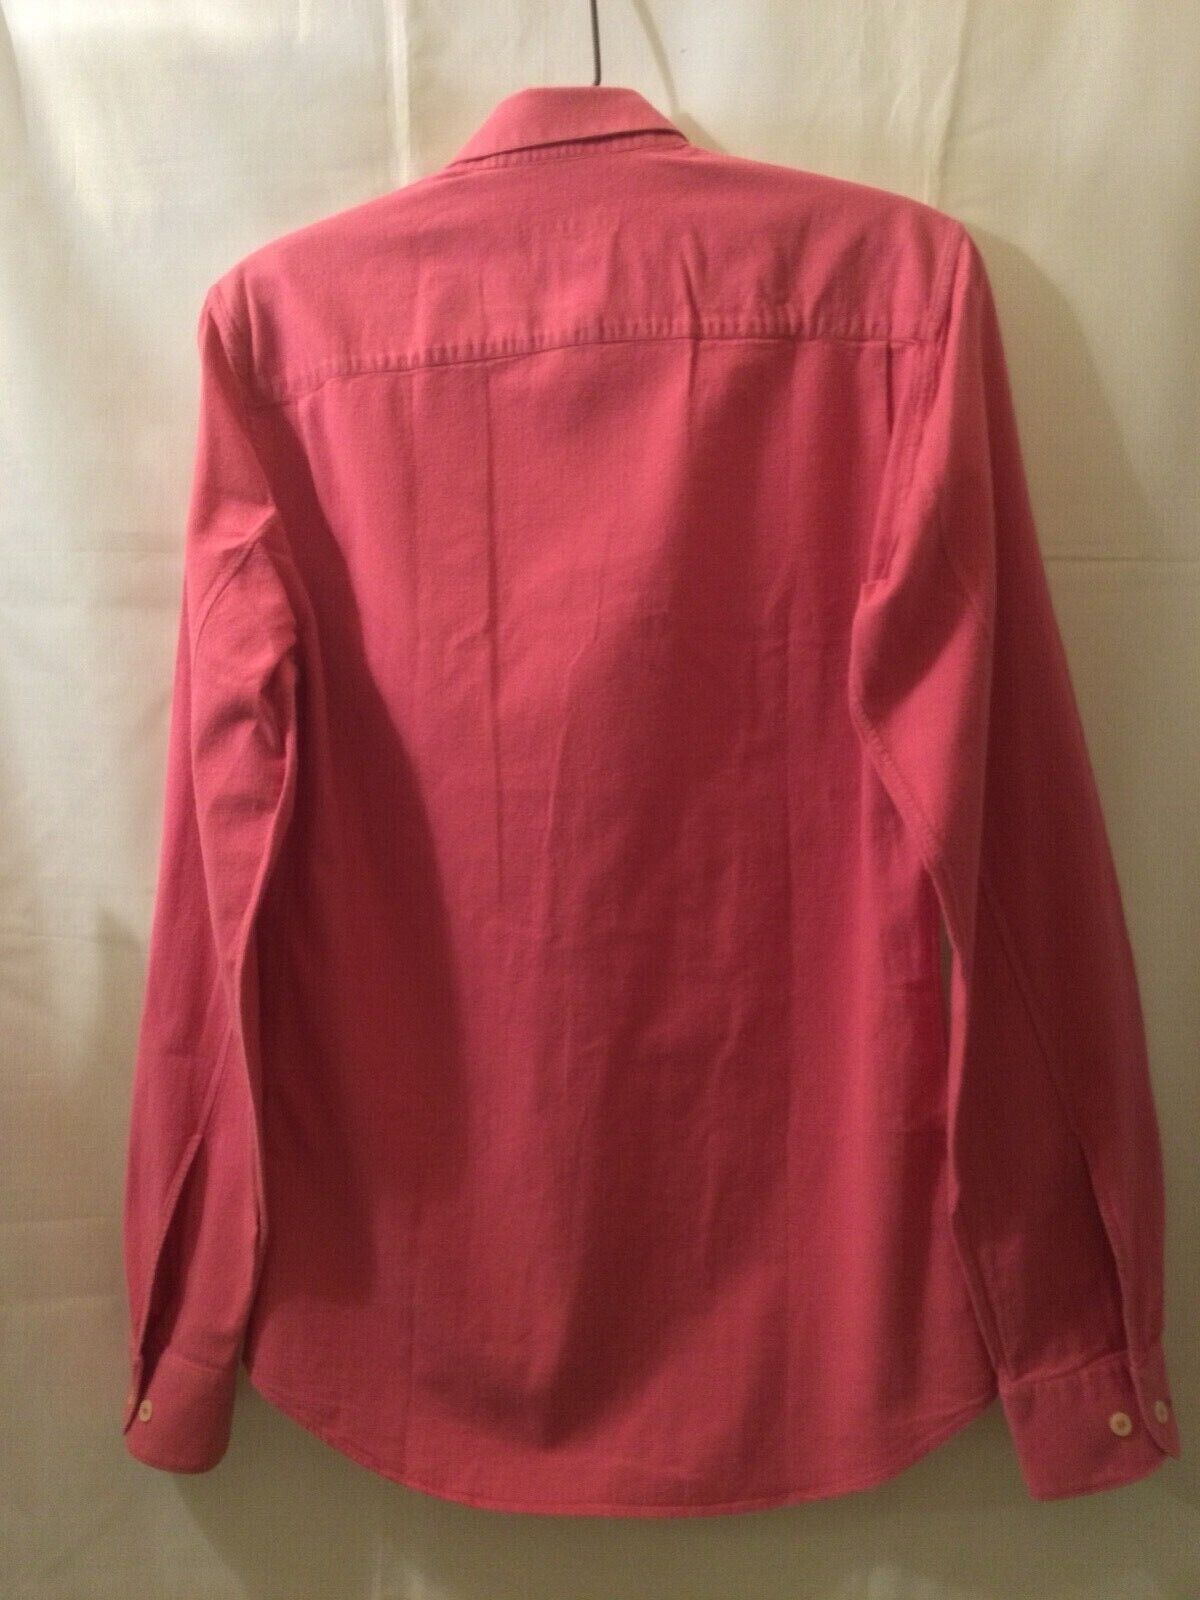 Helmut Lang Early 2000's Pink Brushed Cotton Classic Shirt Size US S / EU 44-46 / 1 - 2 Preview